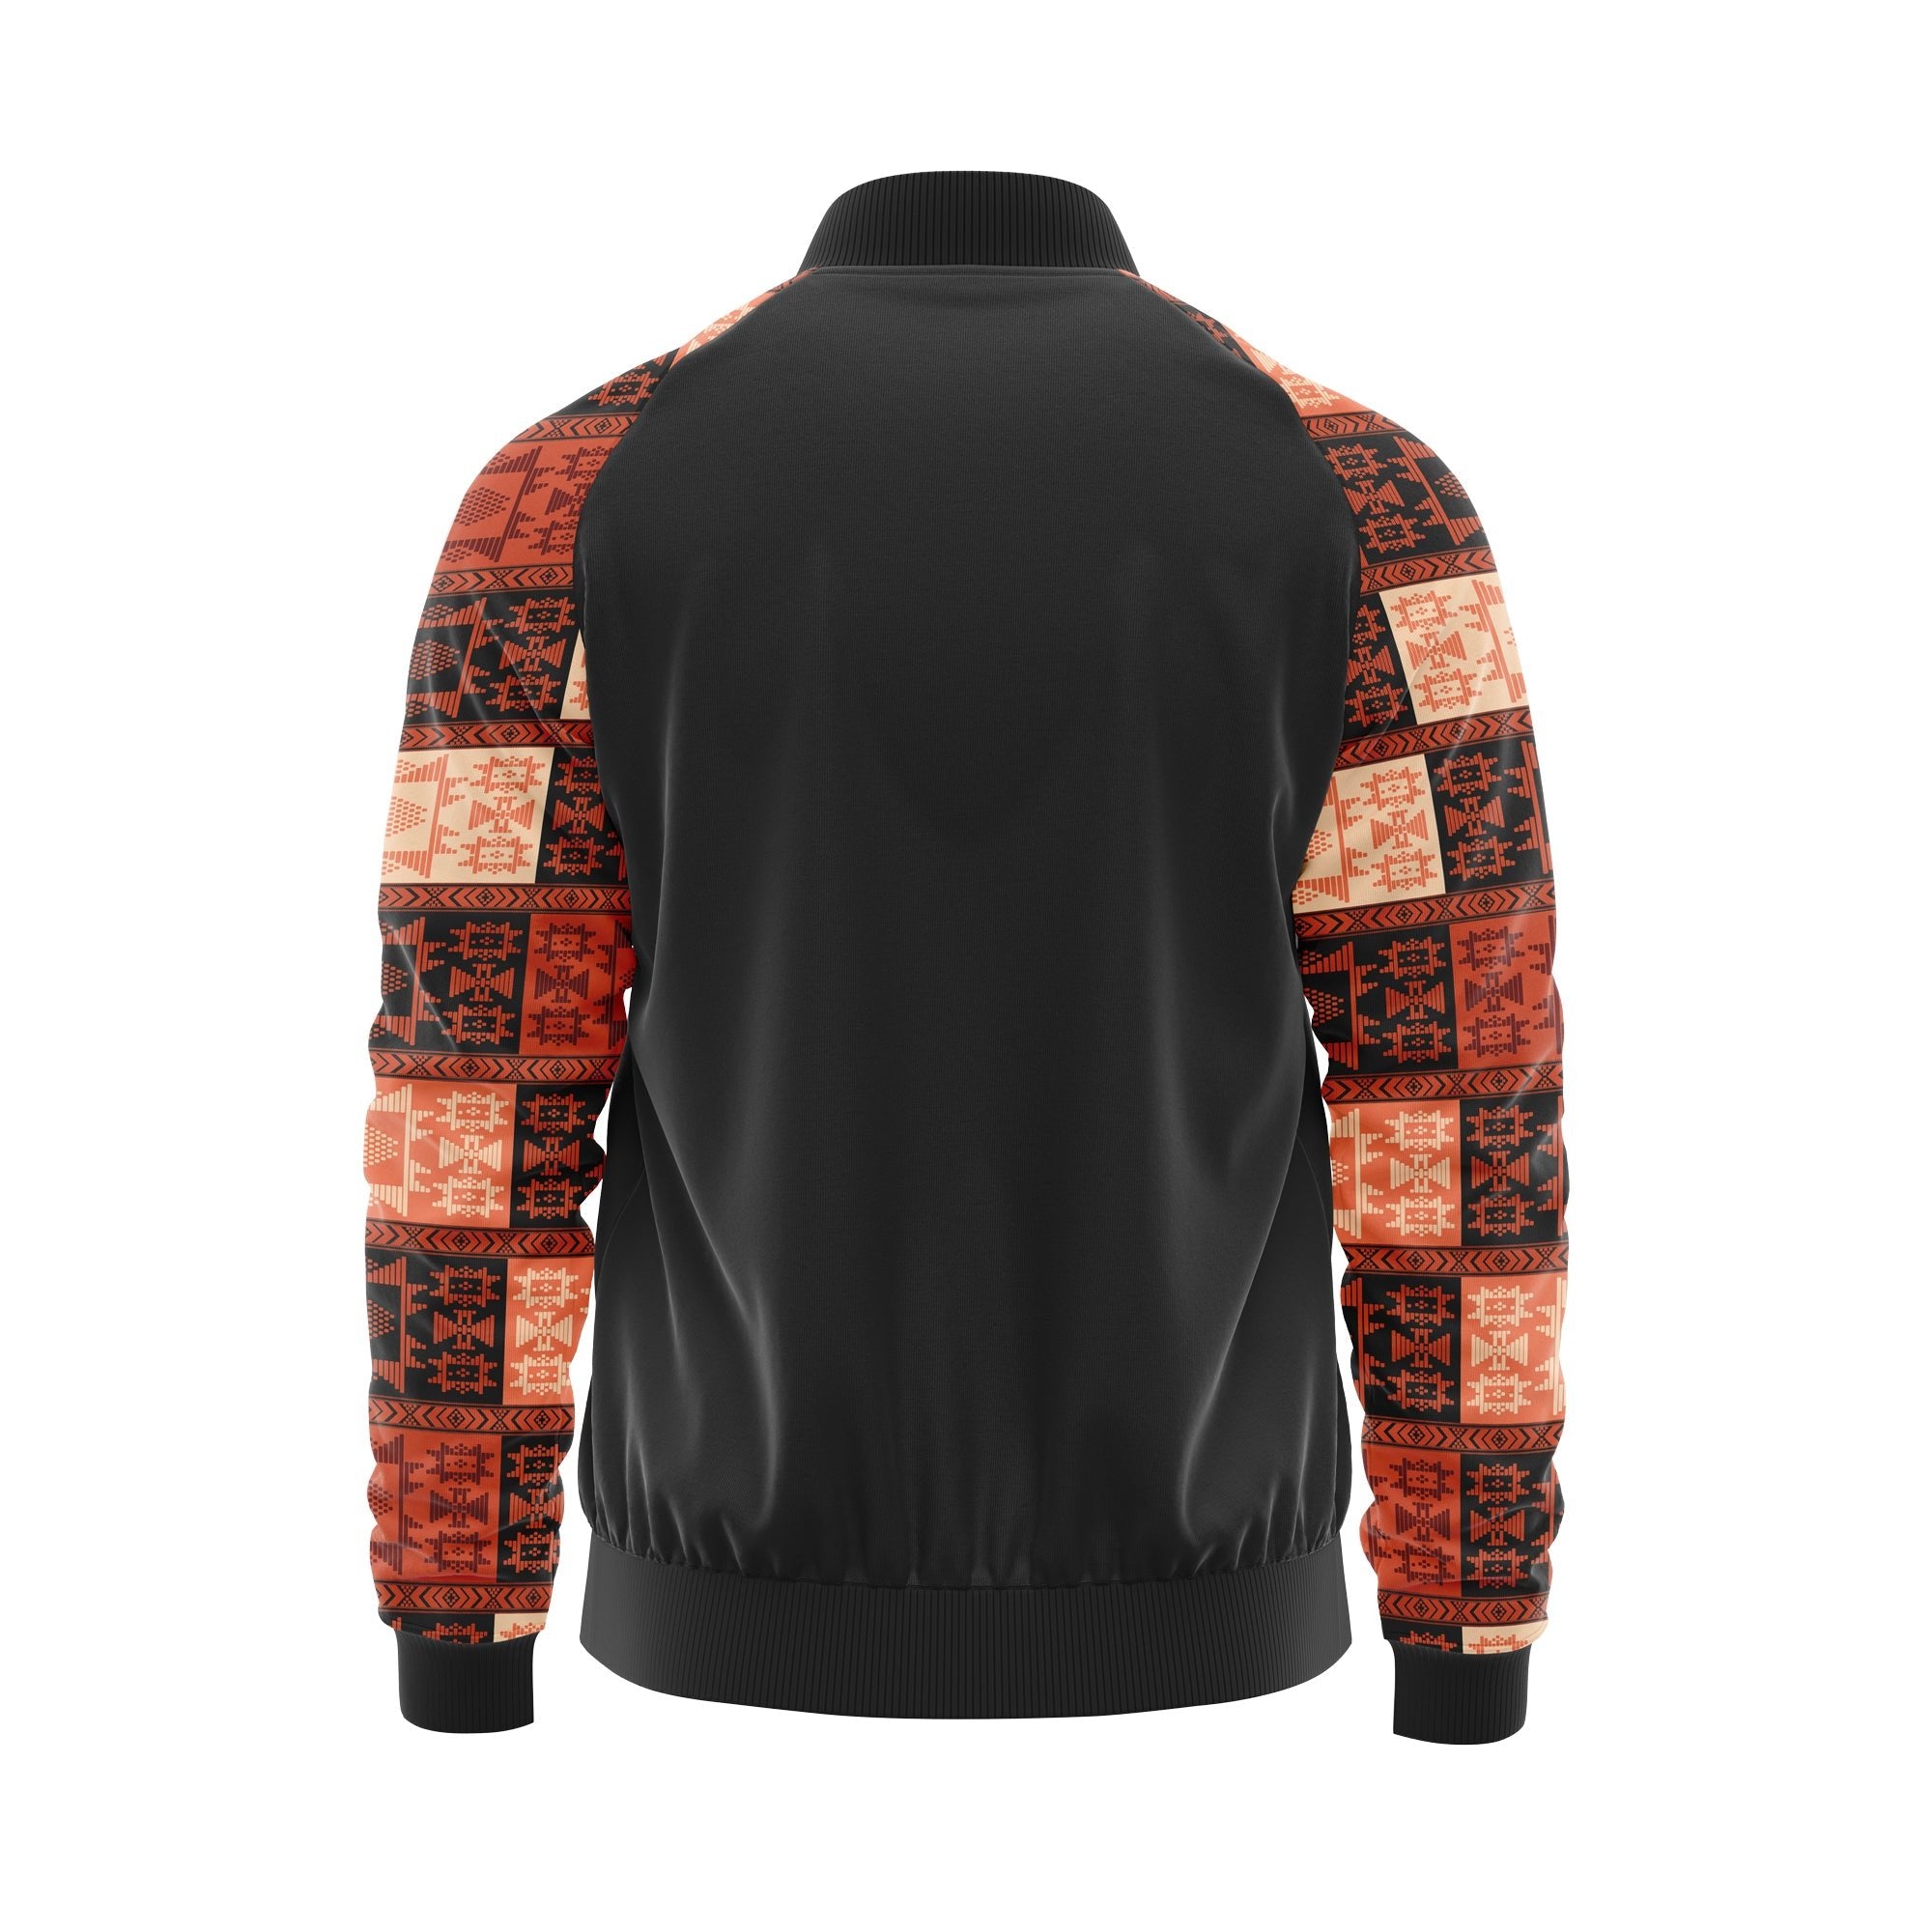 west louis bomber jackets